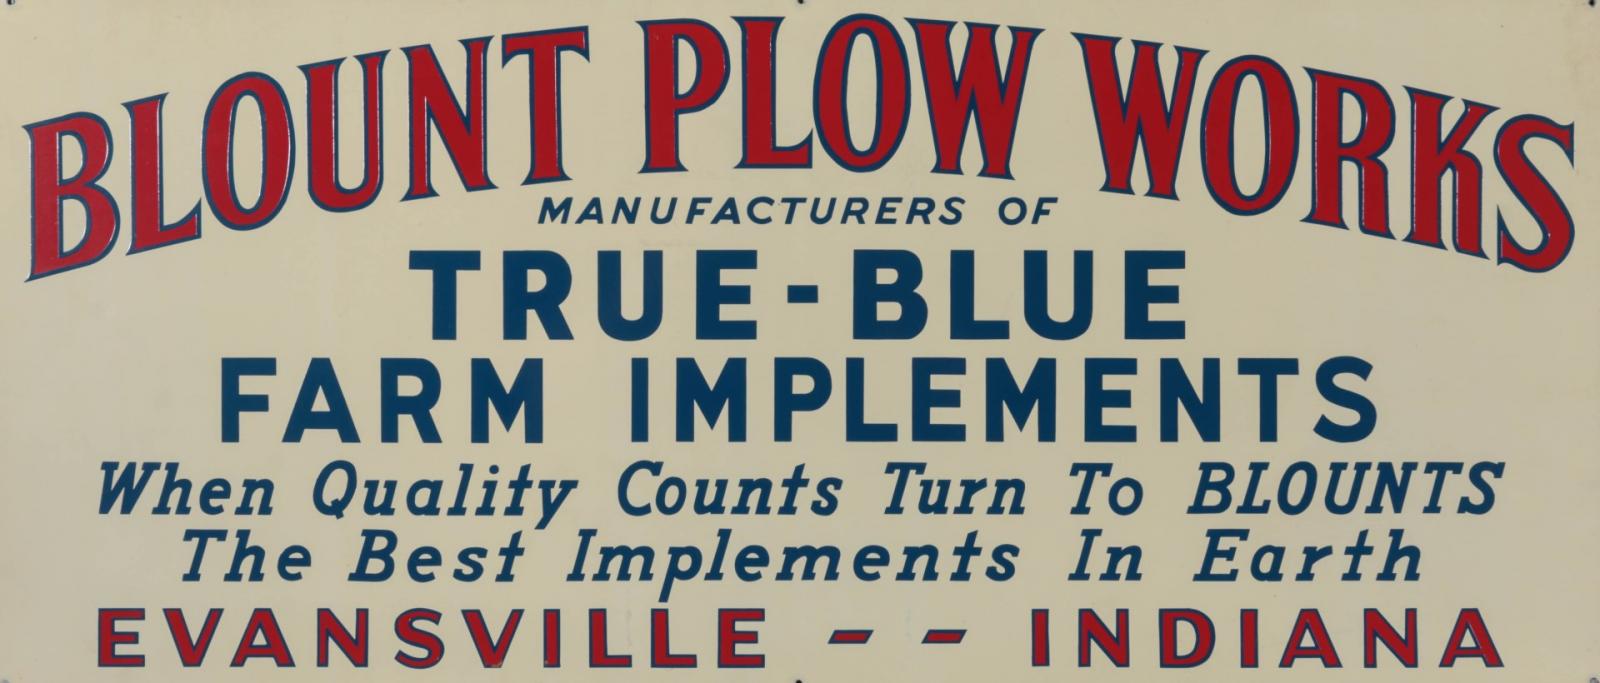 A BLOUNT PLOW WORKS EVANSVILLE INDIANA TIN SIGN